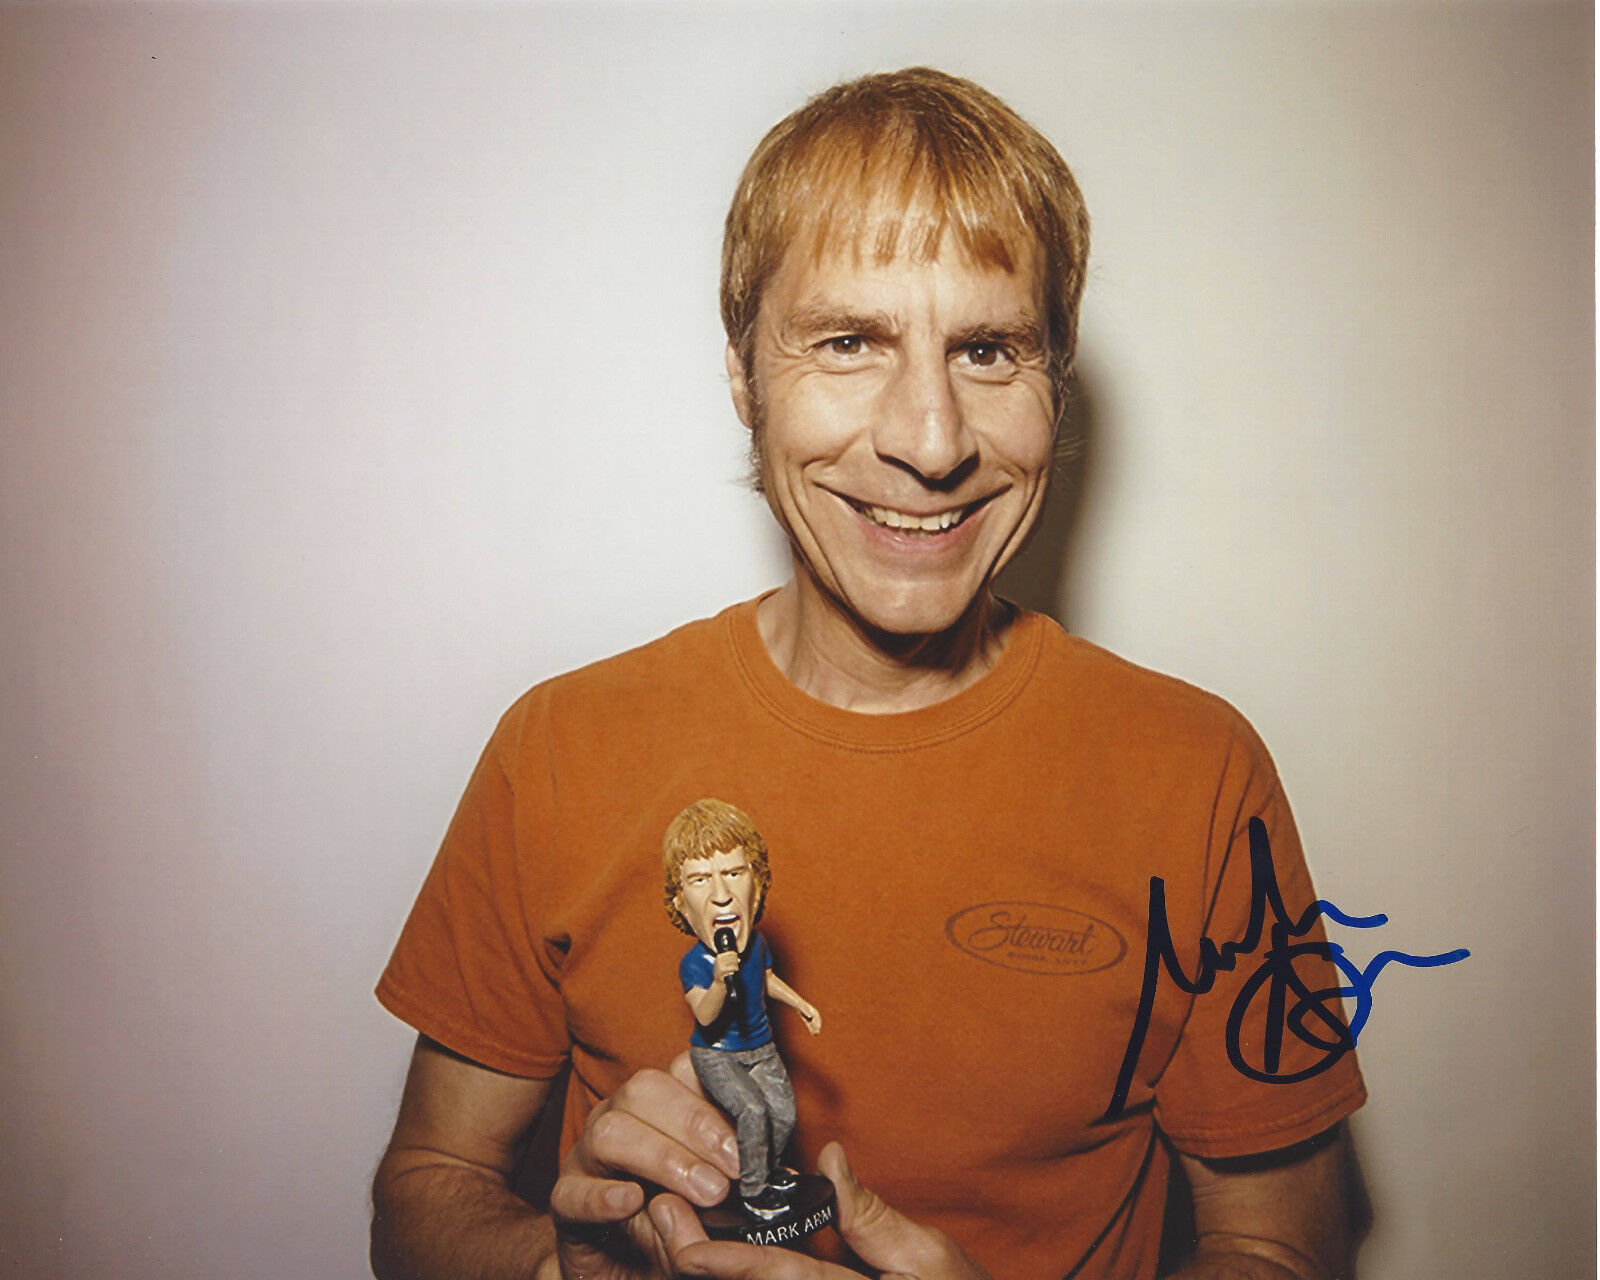 SINGER MARK ARM of MUDHONEY & GREEN RIVER SIGNED AUTHENTIC 8X10 Photo Poster painting C w/COA